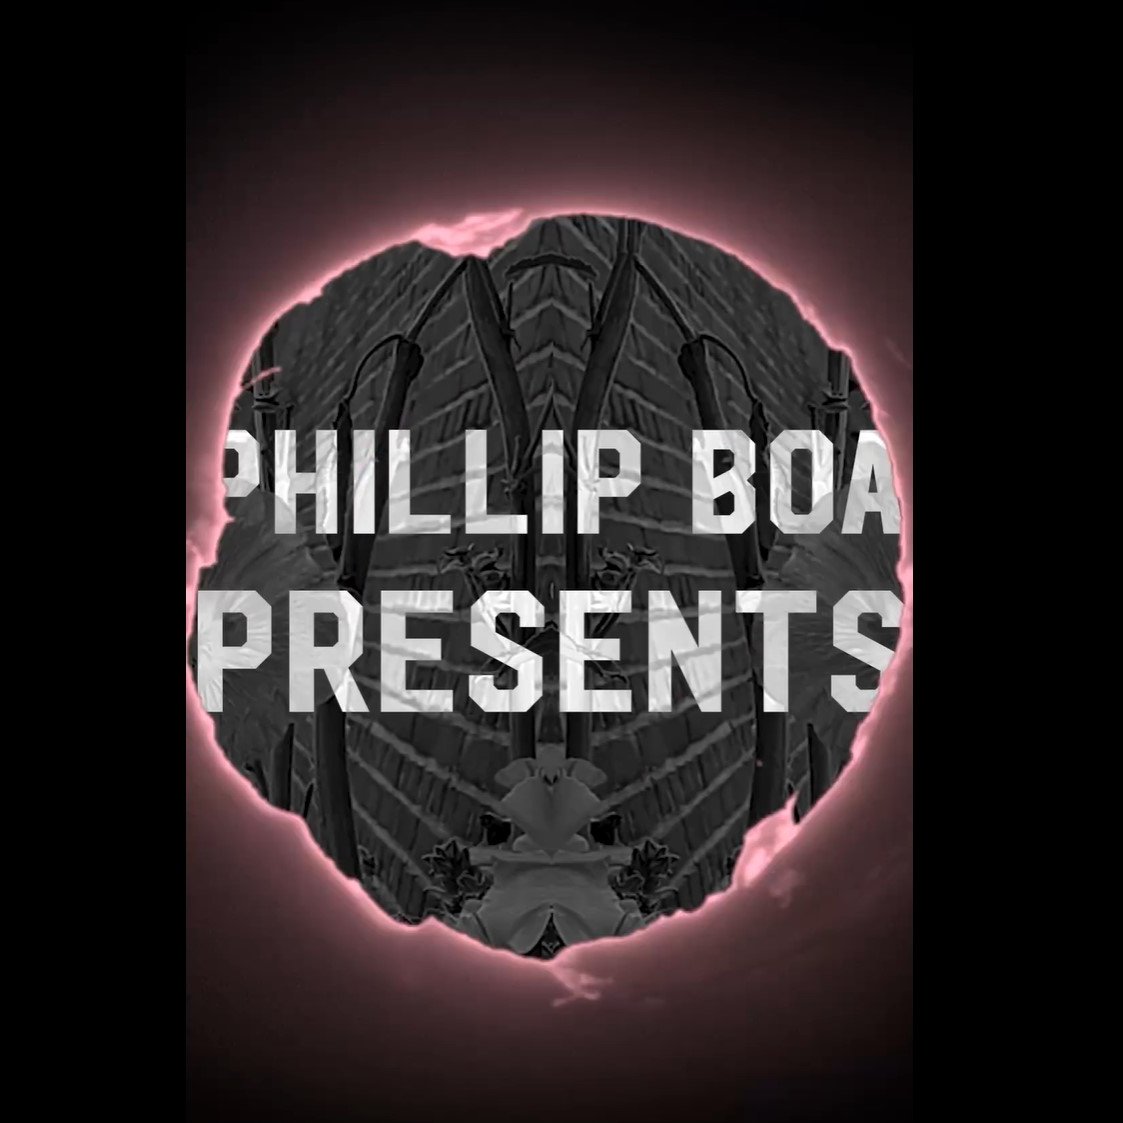 Phillip Boa & The Voodooclub on X: Storytelling Like A Happy Reptile 👉  Reel online on our Instagram page  insights, behind the scenes, studio  impressions & more  enjoy it! 😎